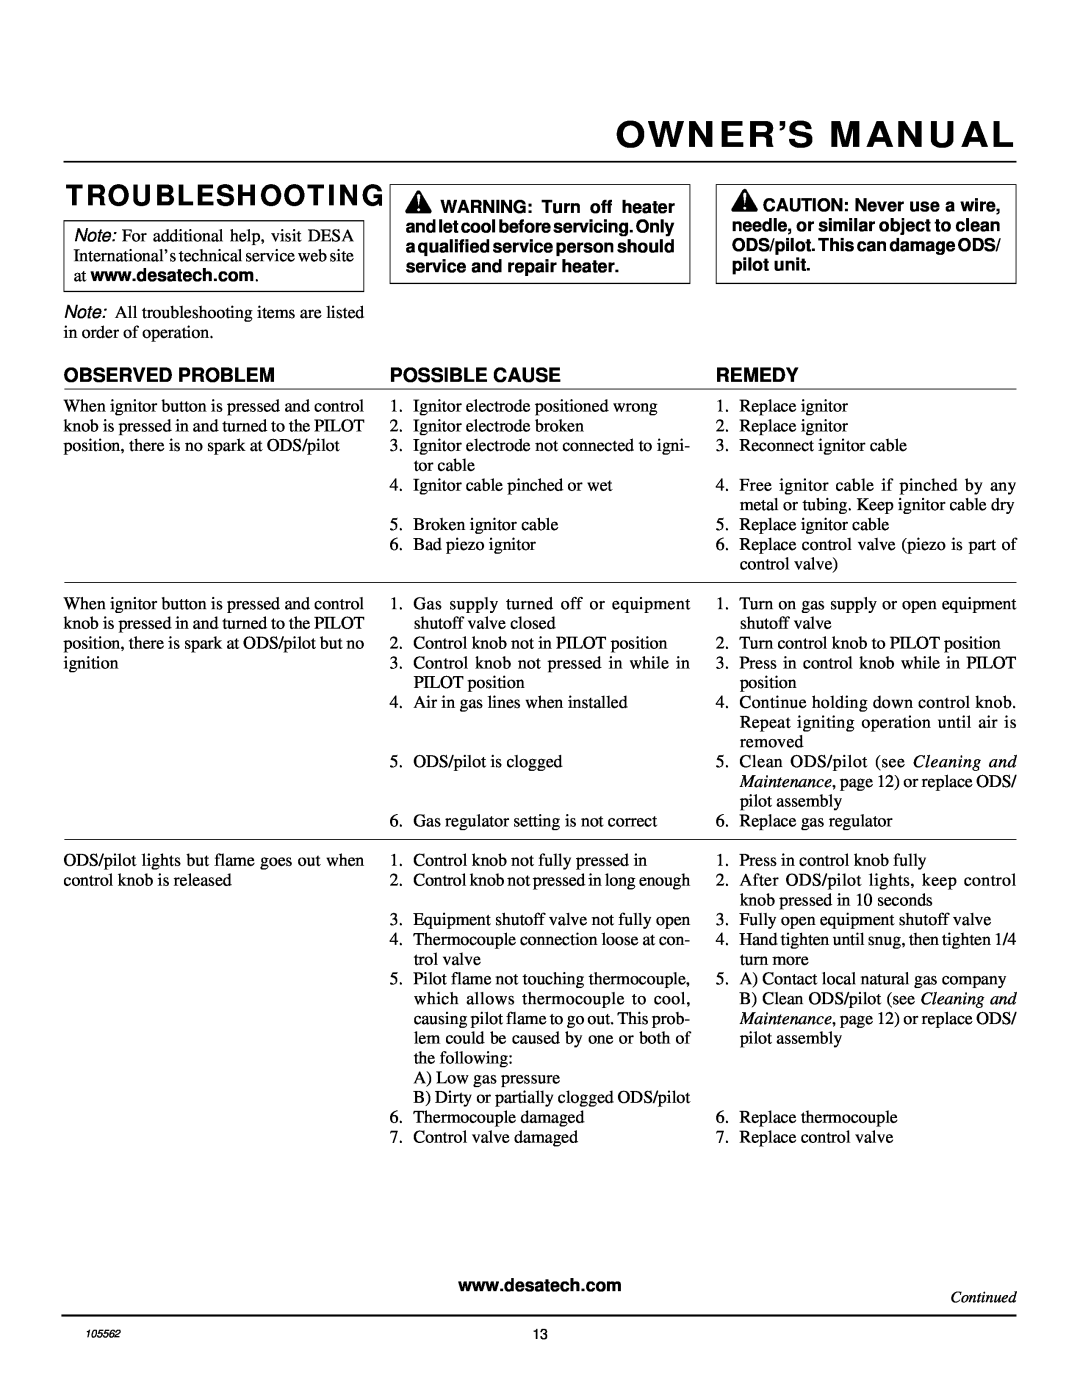 Desa FA-2B installation manual Troubleshooting, Observed Problem, Possible Cause, Remedy 